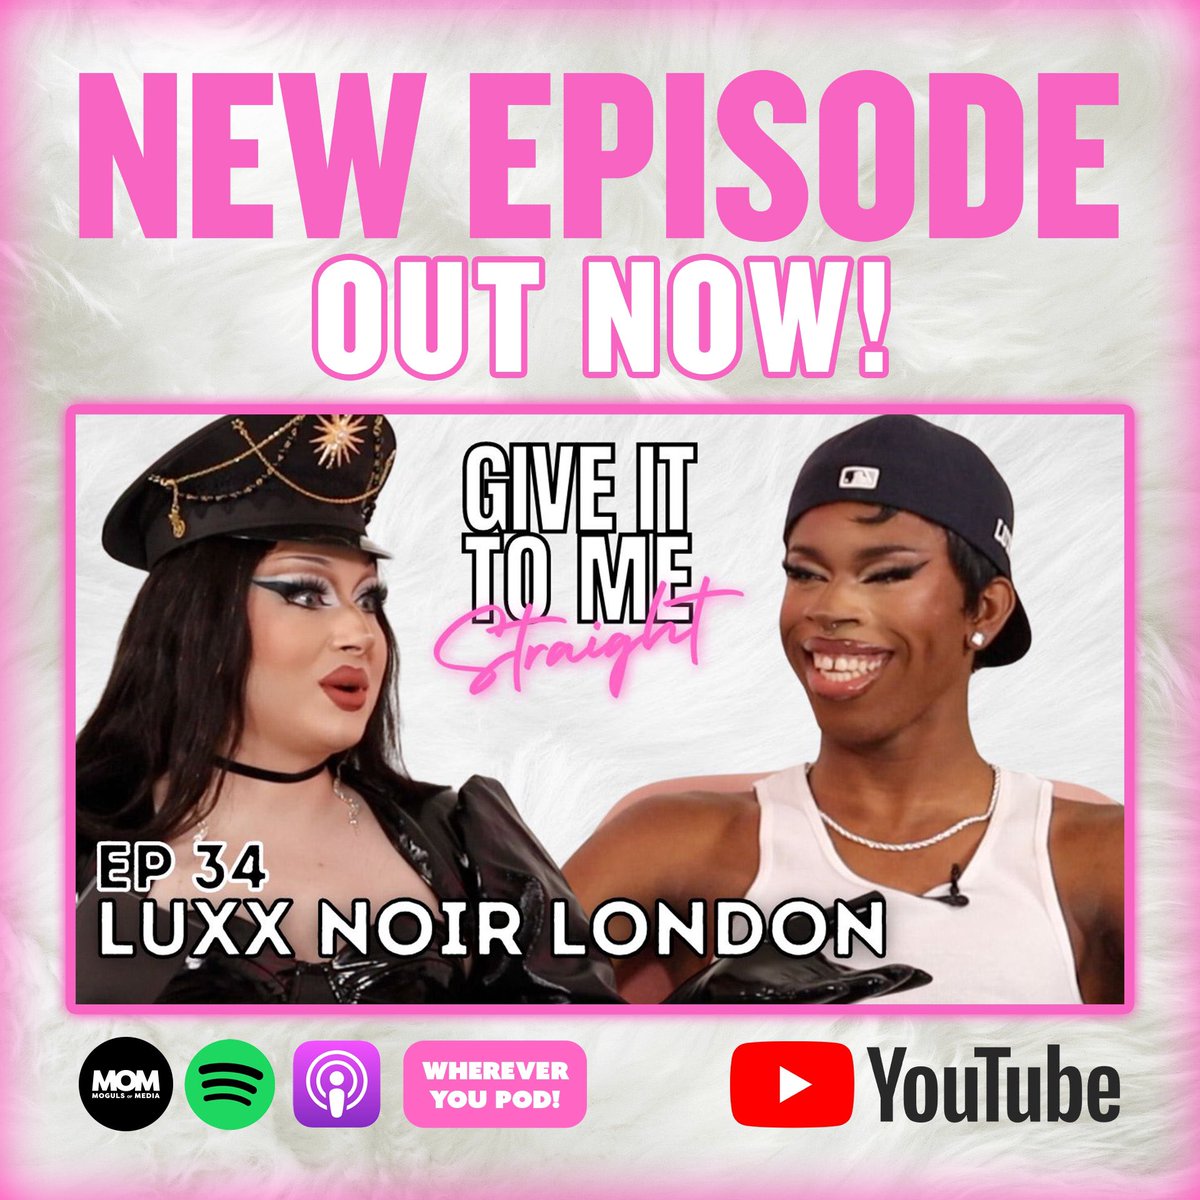 Gagged them a bit, for sure! A new episode of #GiveItToMeStraight with @maddymorphosis and @luxxnoirlondon is out now! Watch on Maddy’s YouTube channel or listen on the MOM Podcast Network on your preferred podcasting app 🎧